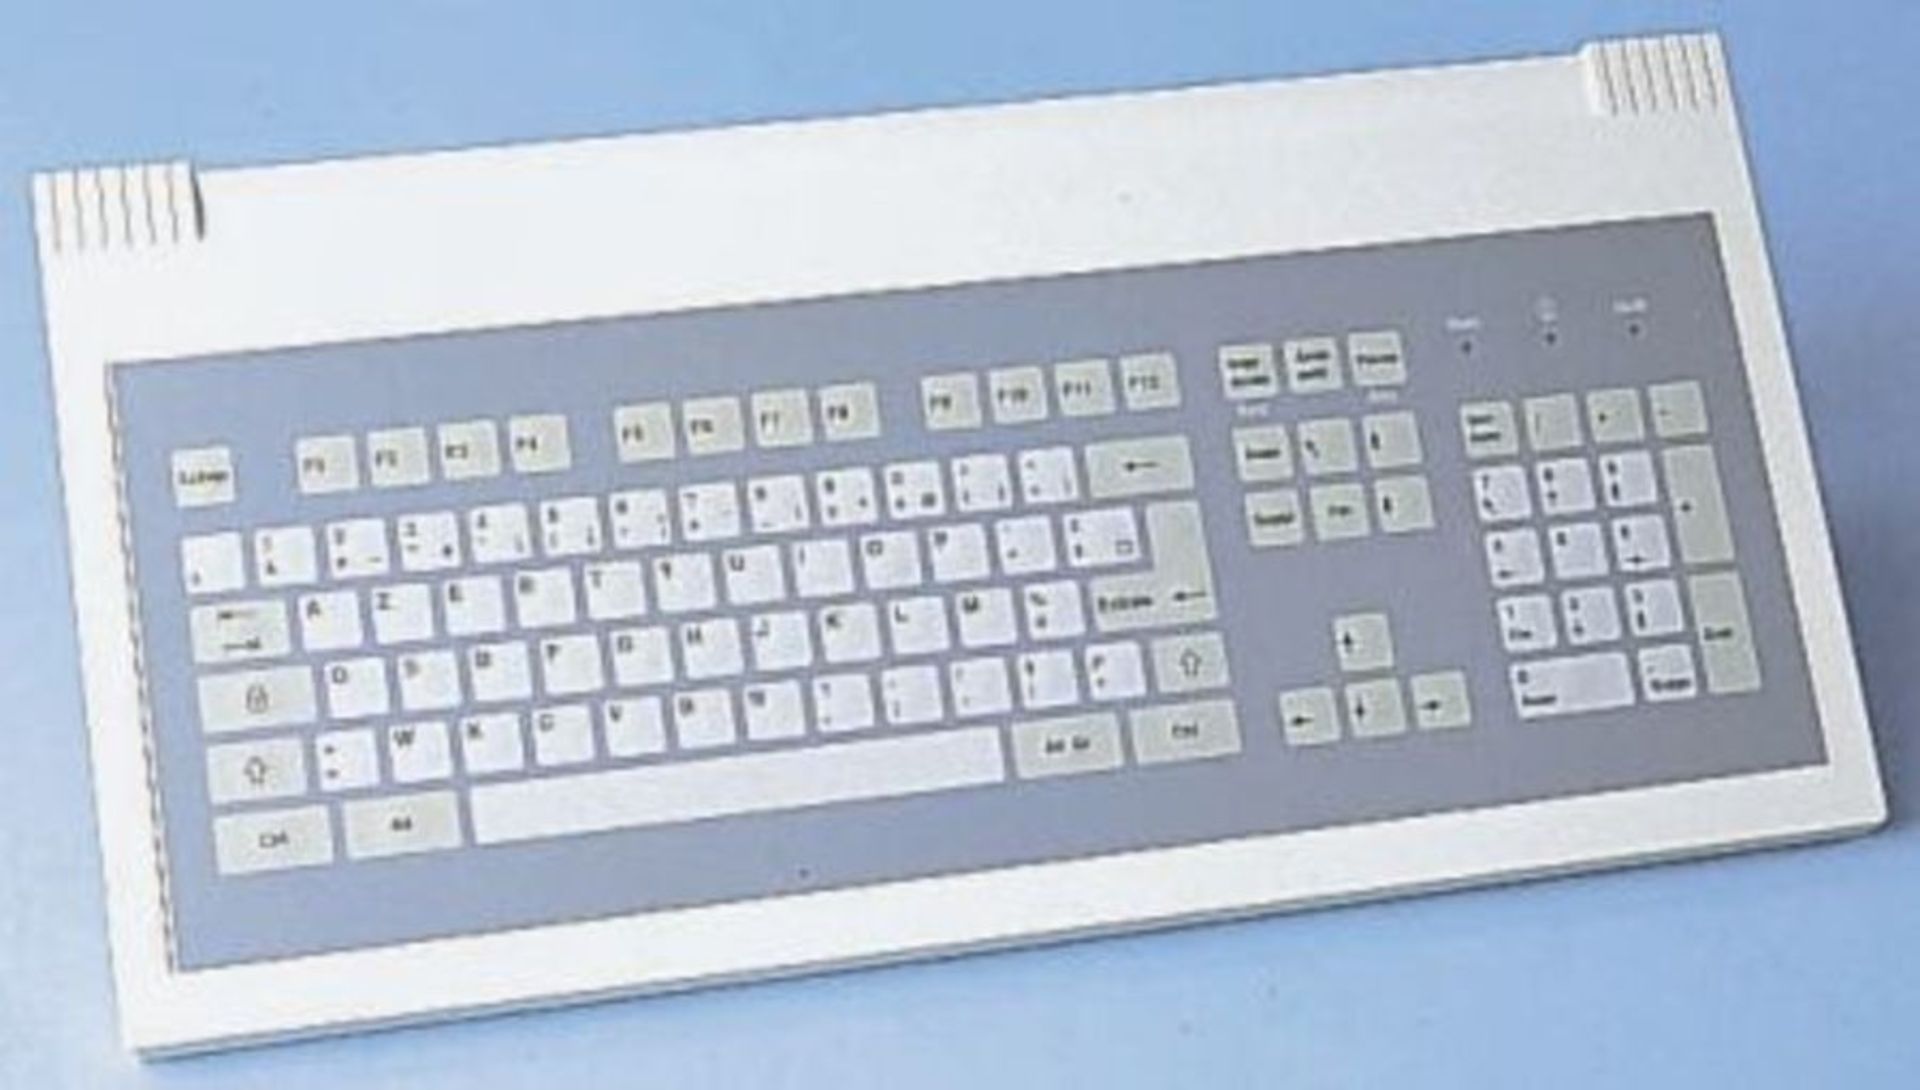 X-Acto PCCM102AZ Wired PS/2 Keyboard, AZERTY - Image 2 of 2